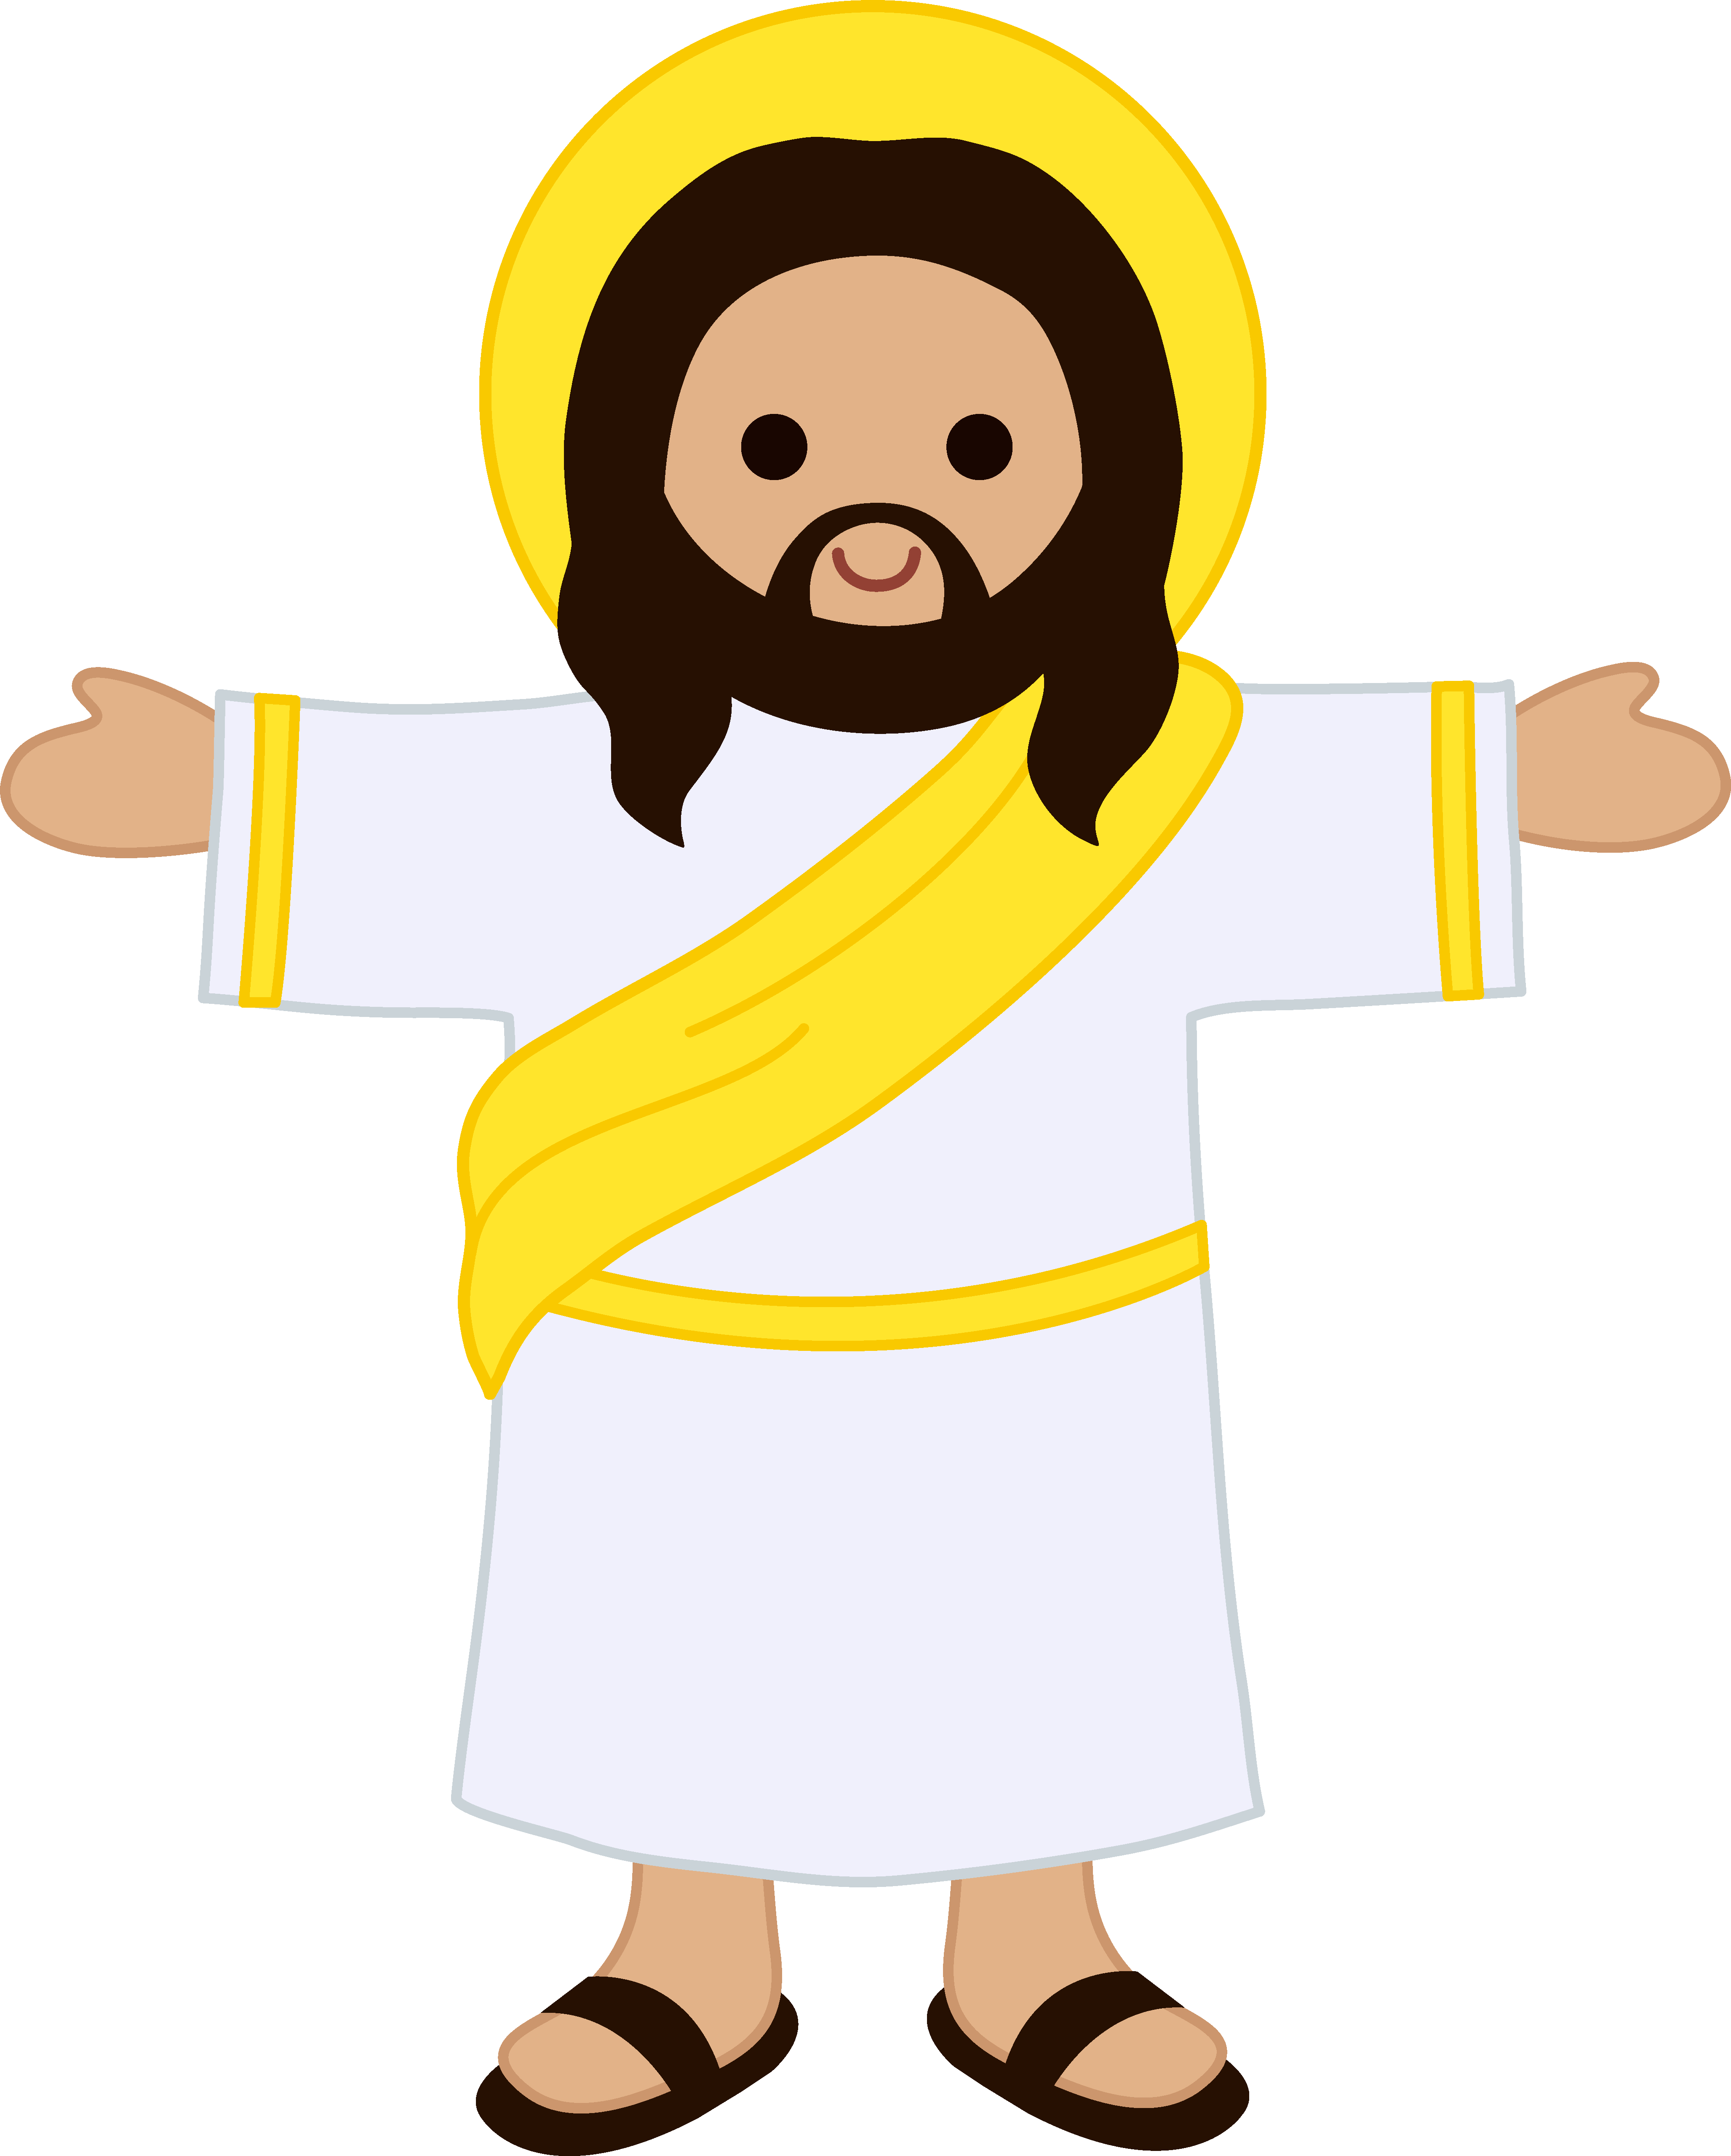 Jesus Clipart to Download - dbclipart.com